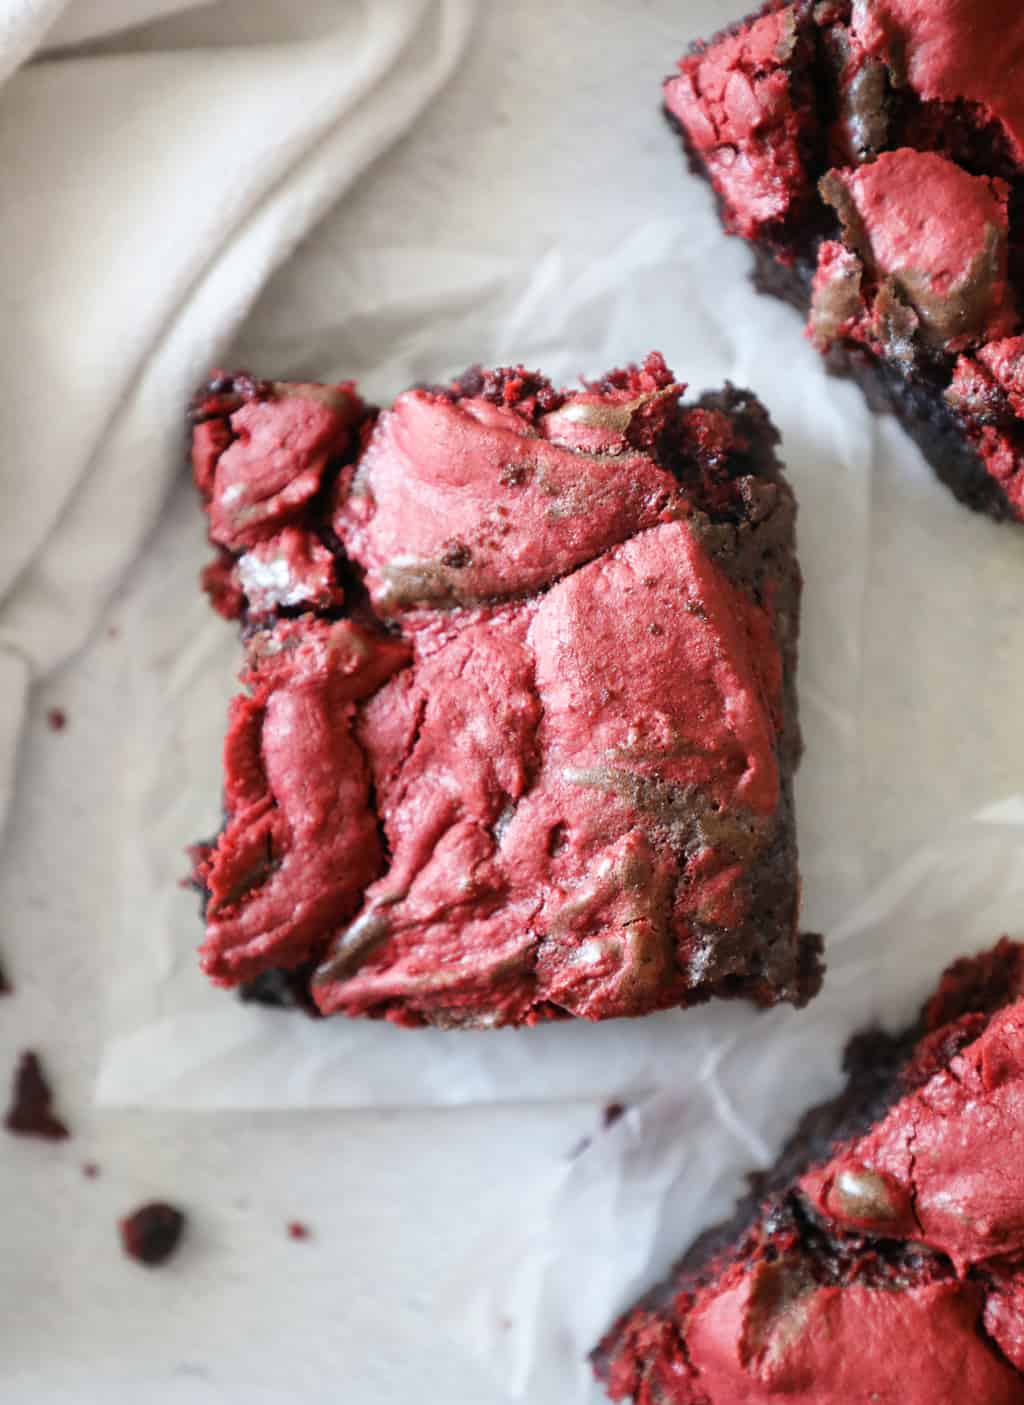 birds eye view of red velvet brownies next to a white tea towel